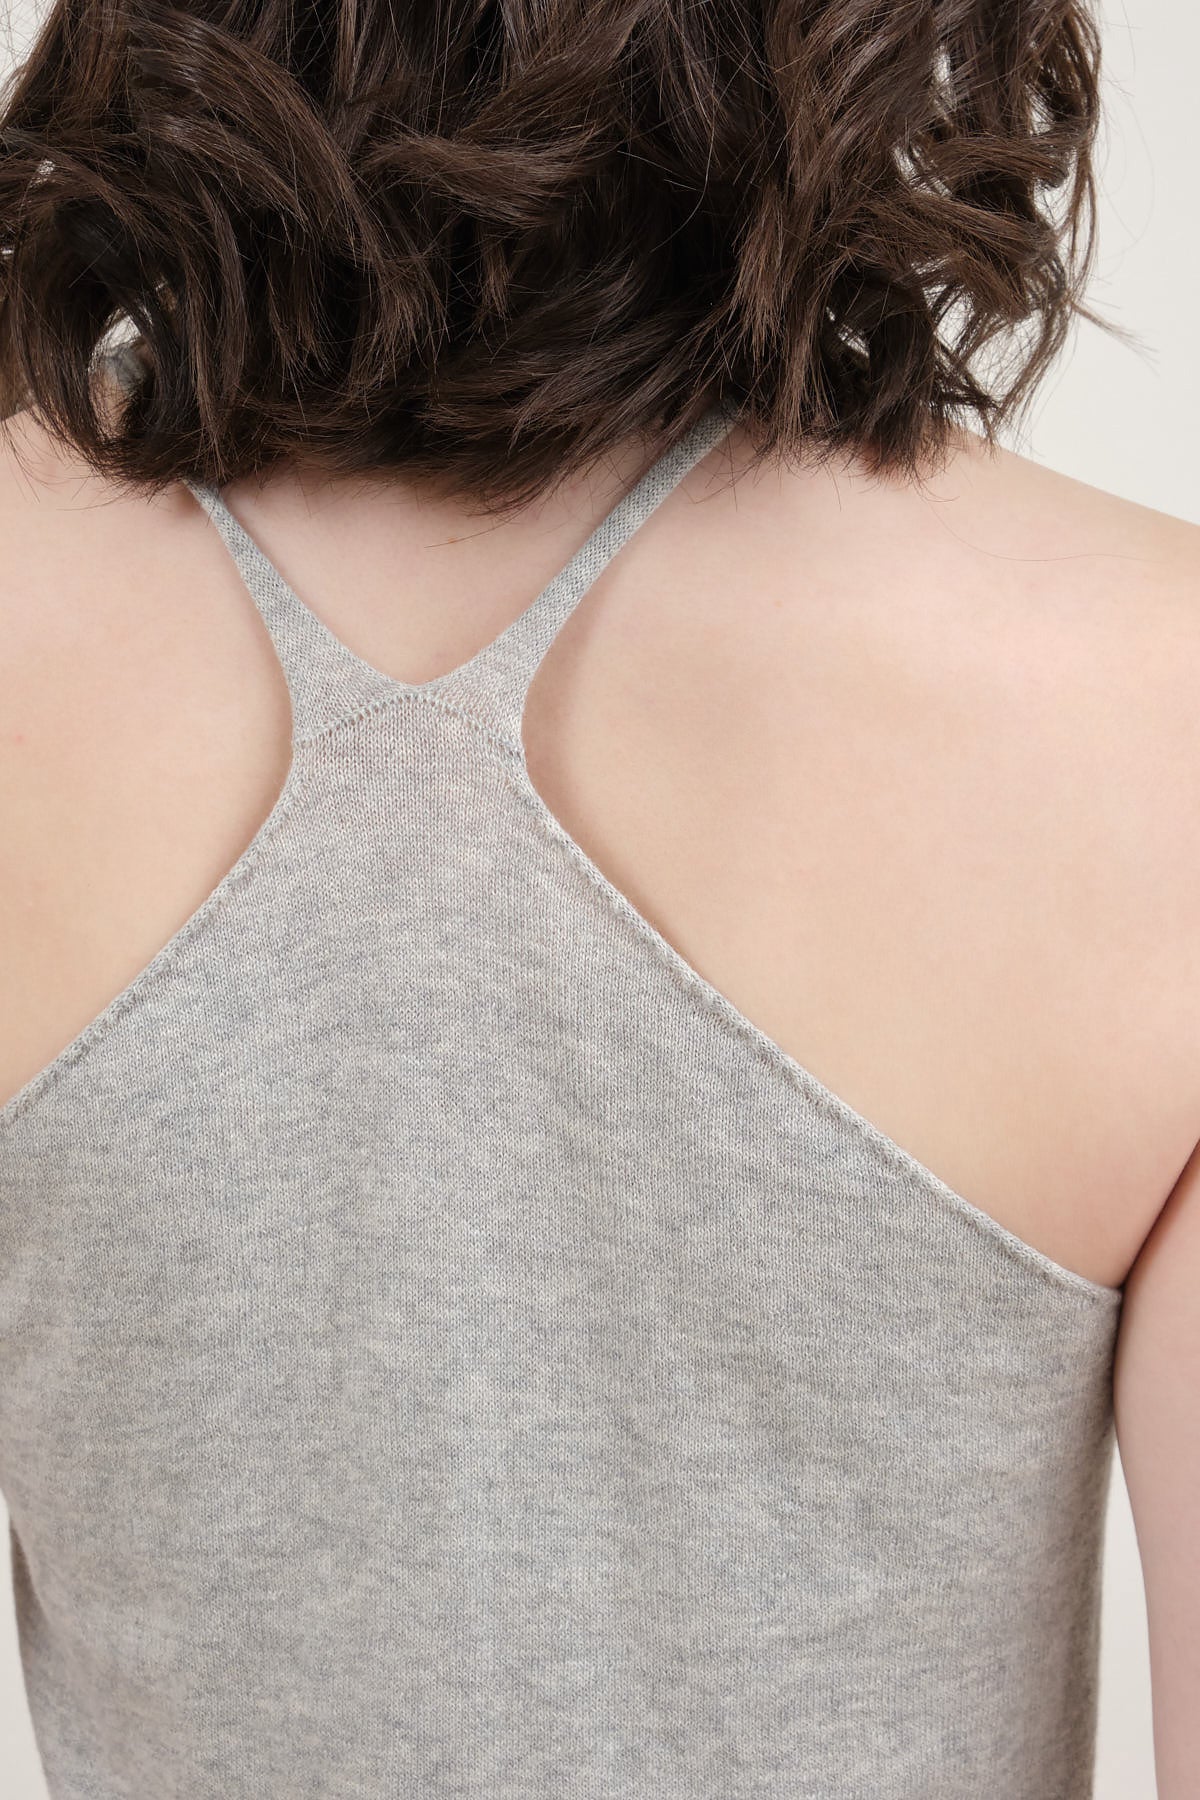 Racer back on Cotton Cashmere Camisole in Gray